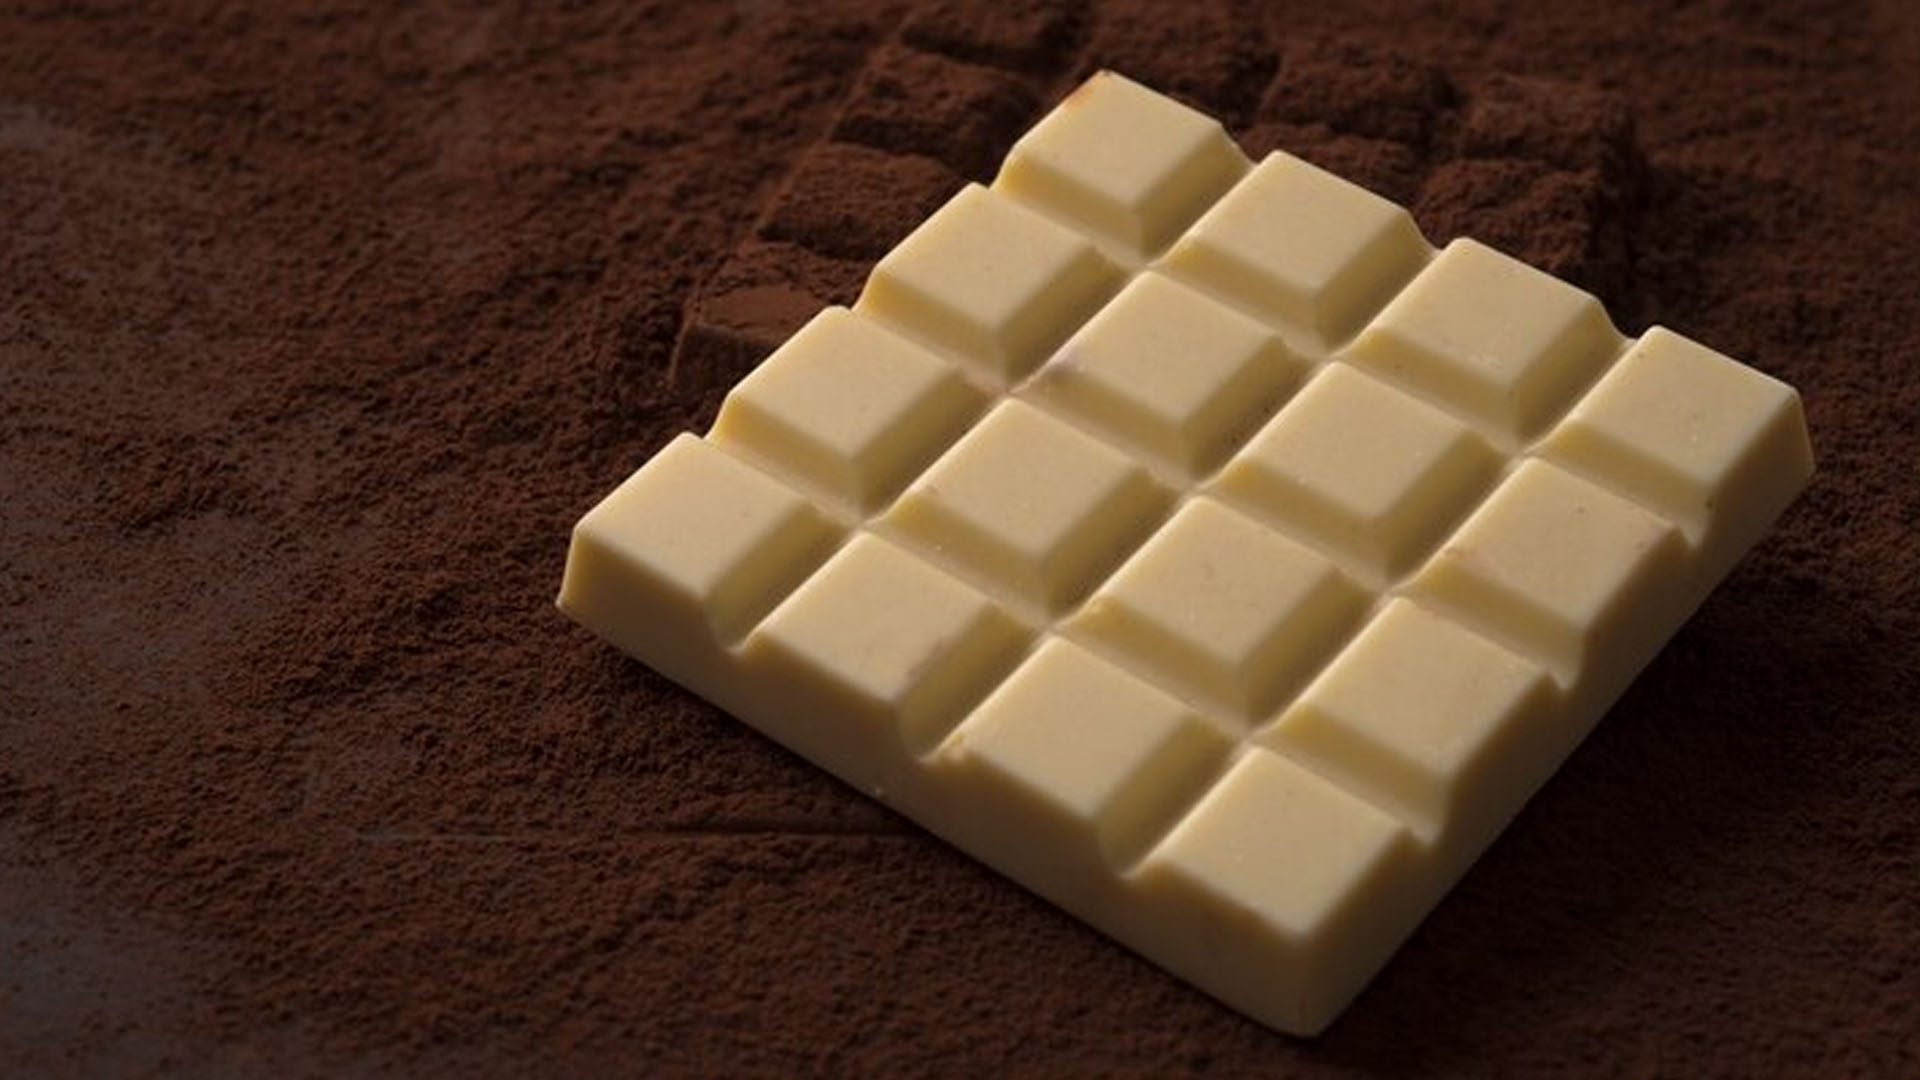 What Are The Health Benefits of White Chocolate?